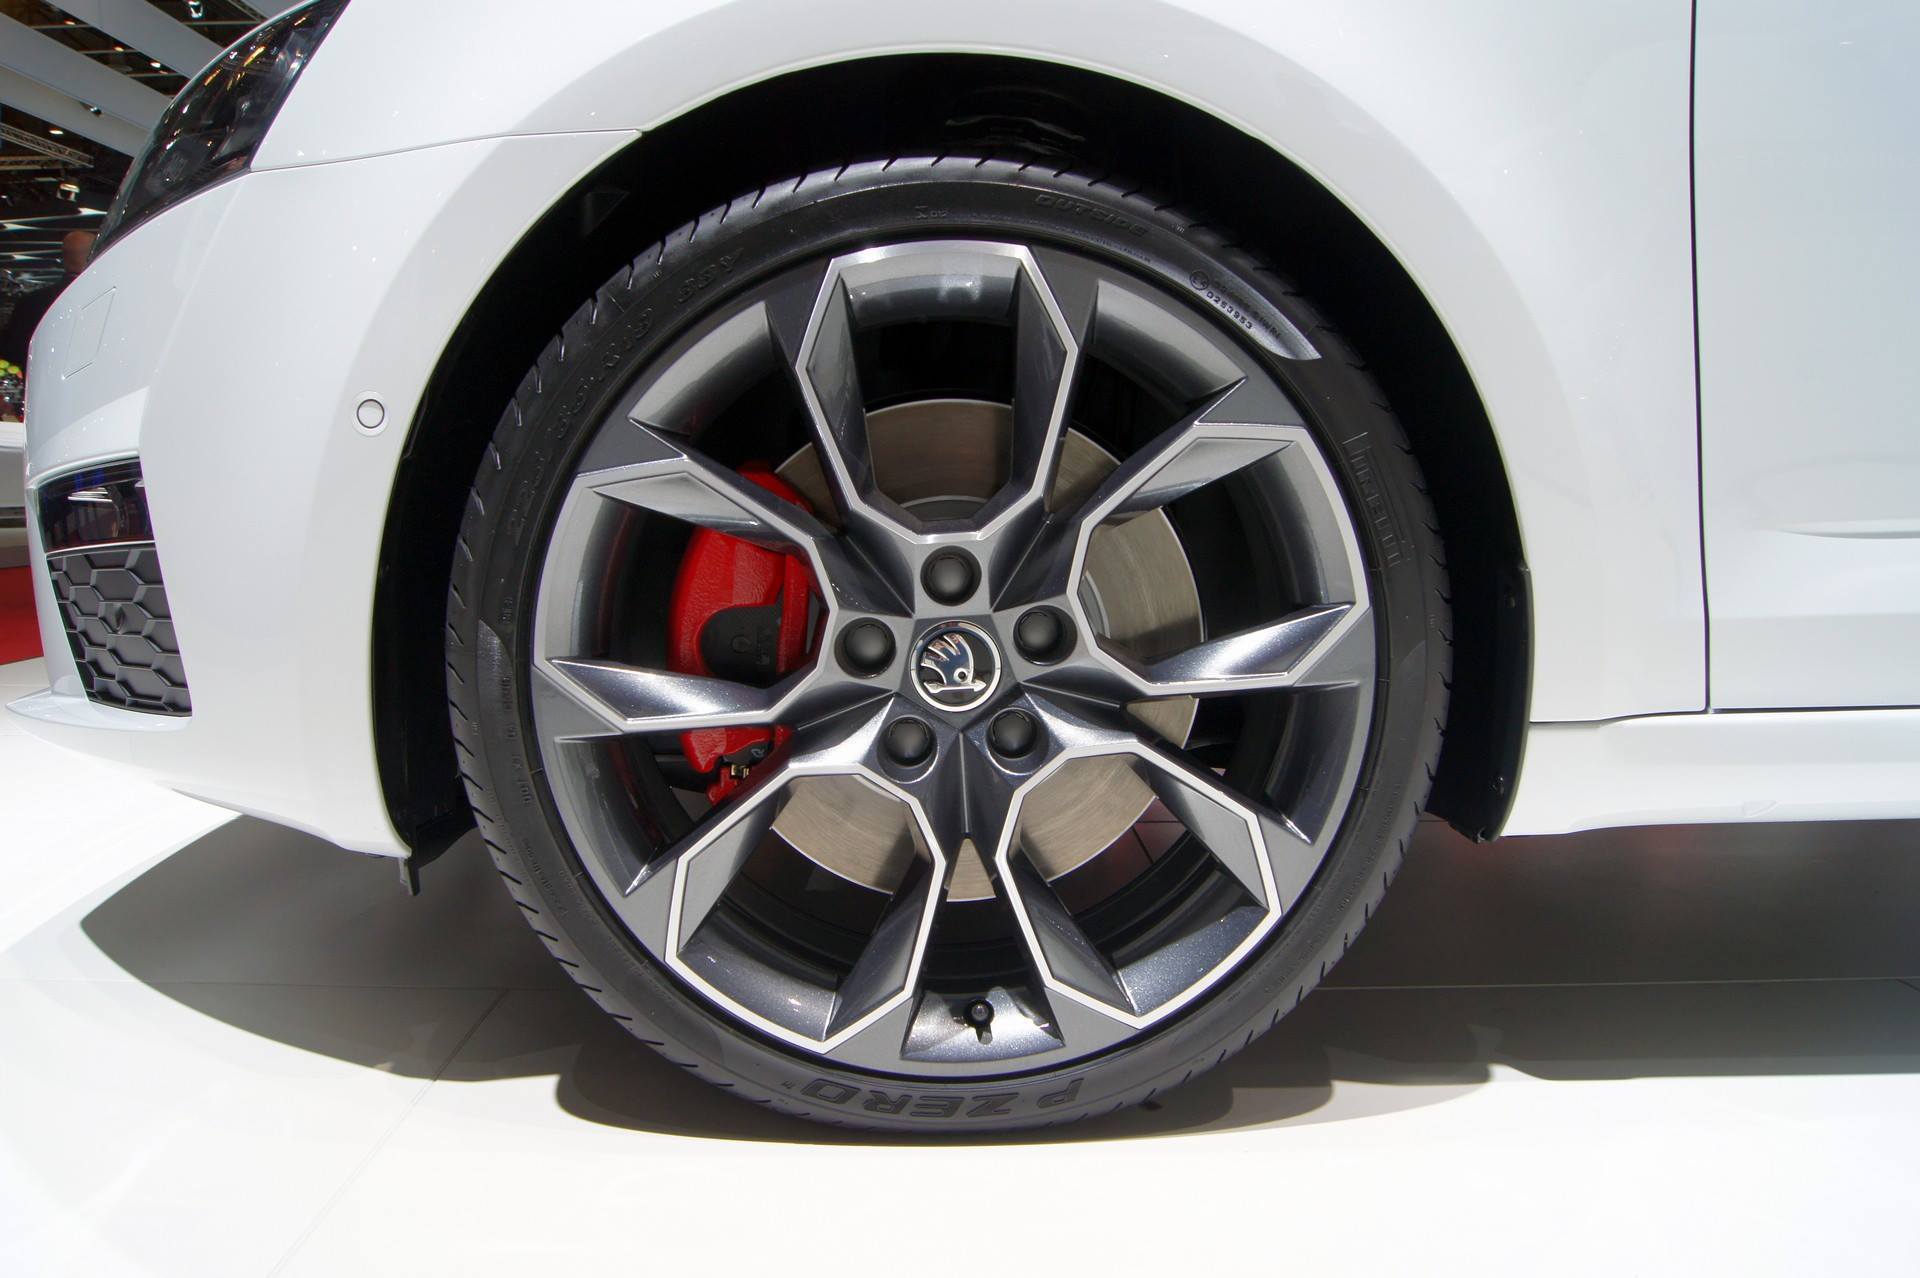 19-inch extreme wheels for the Octavia vRS